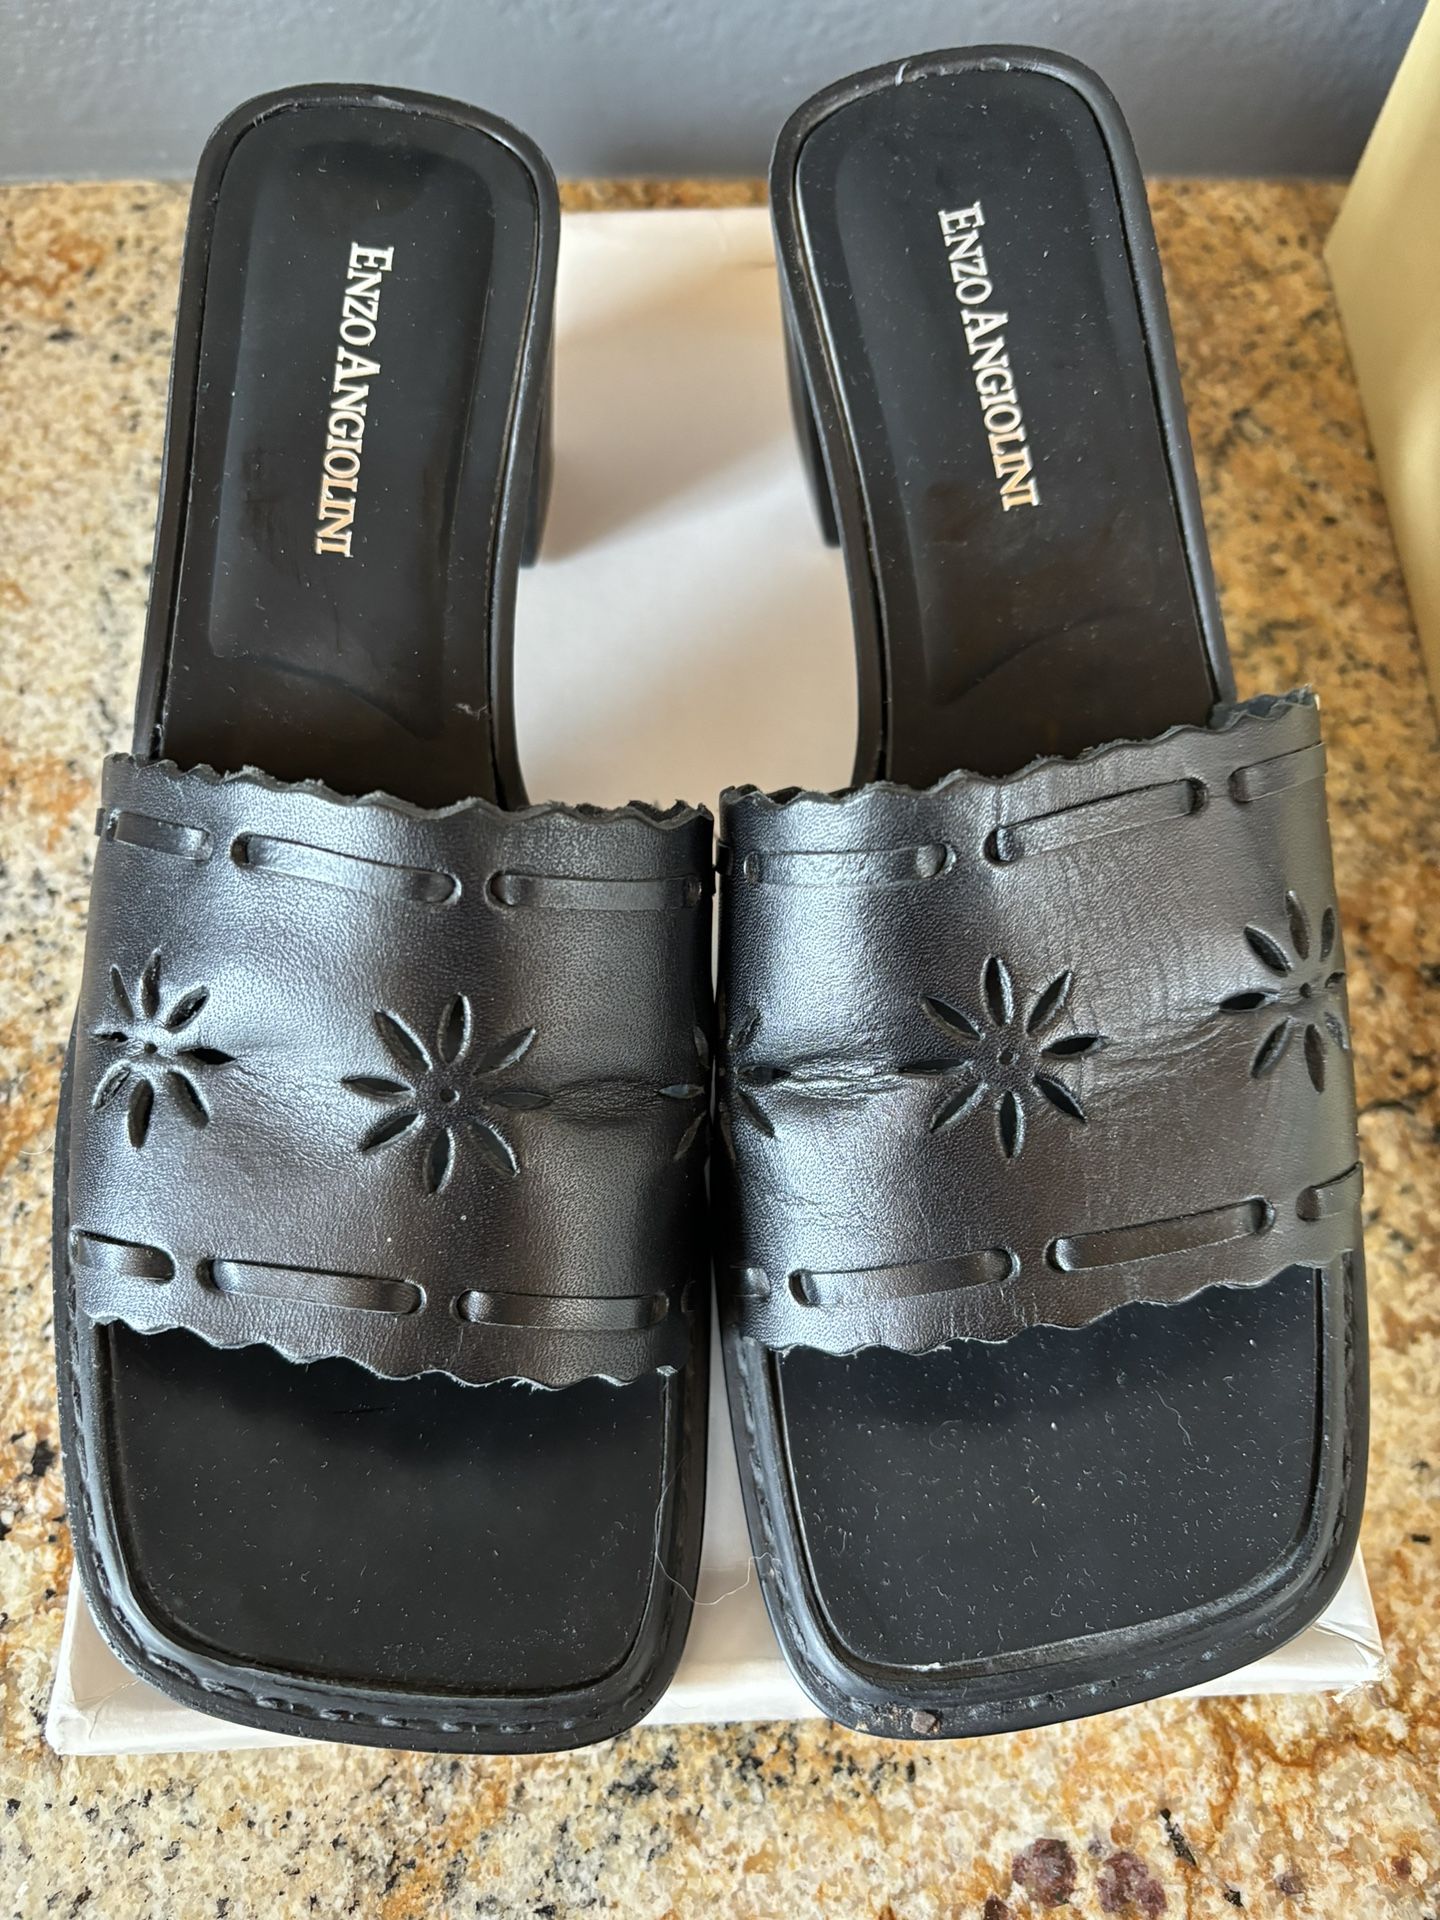 Enzo Angiolini NWT Black Leather Sandals Size 9 Shoes